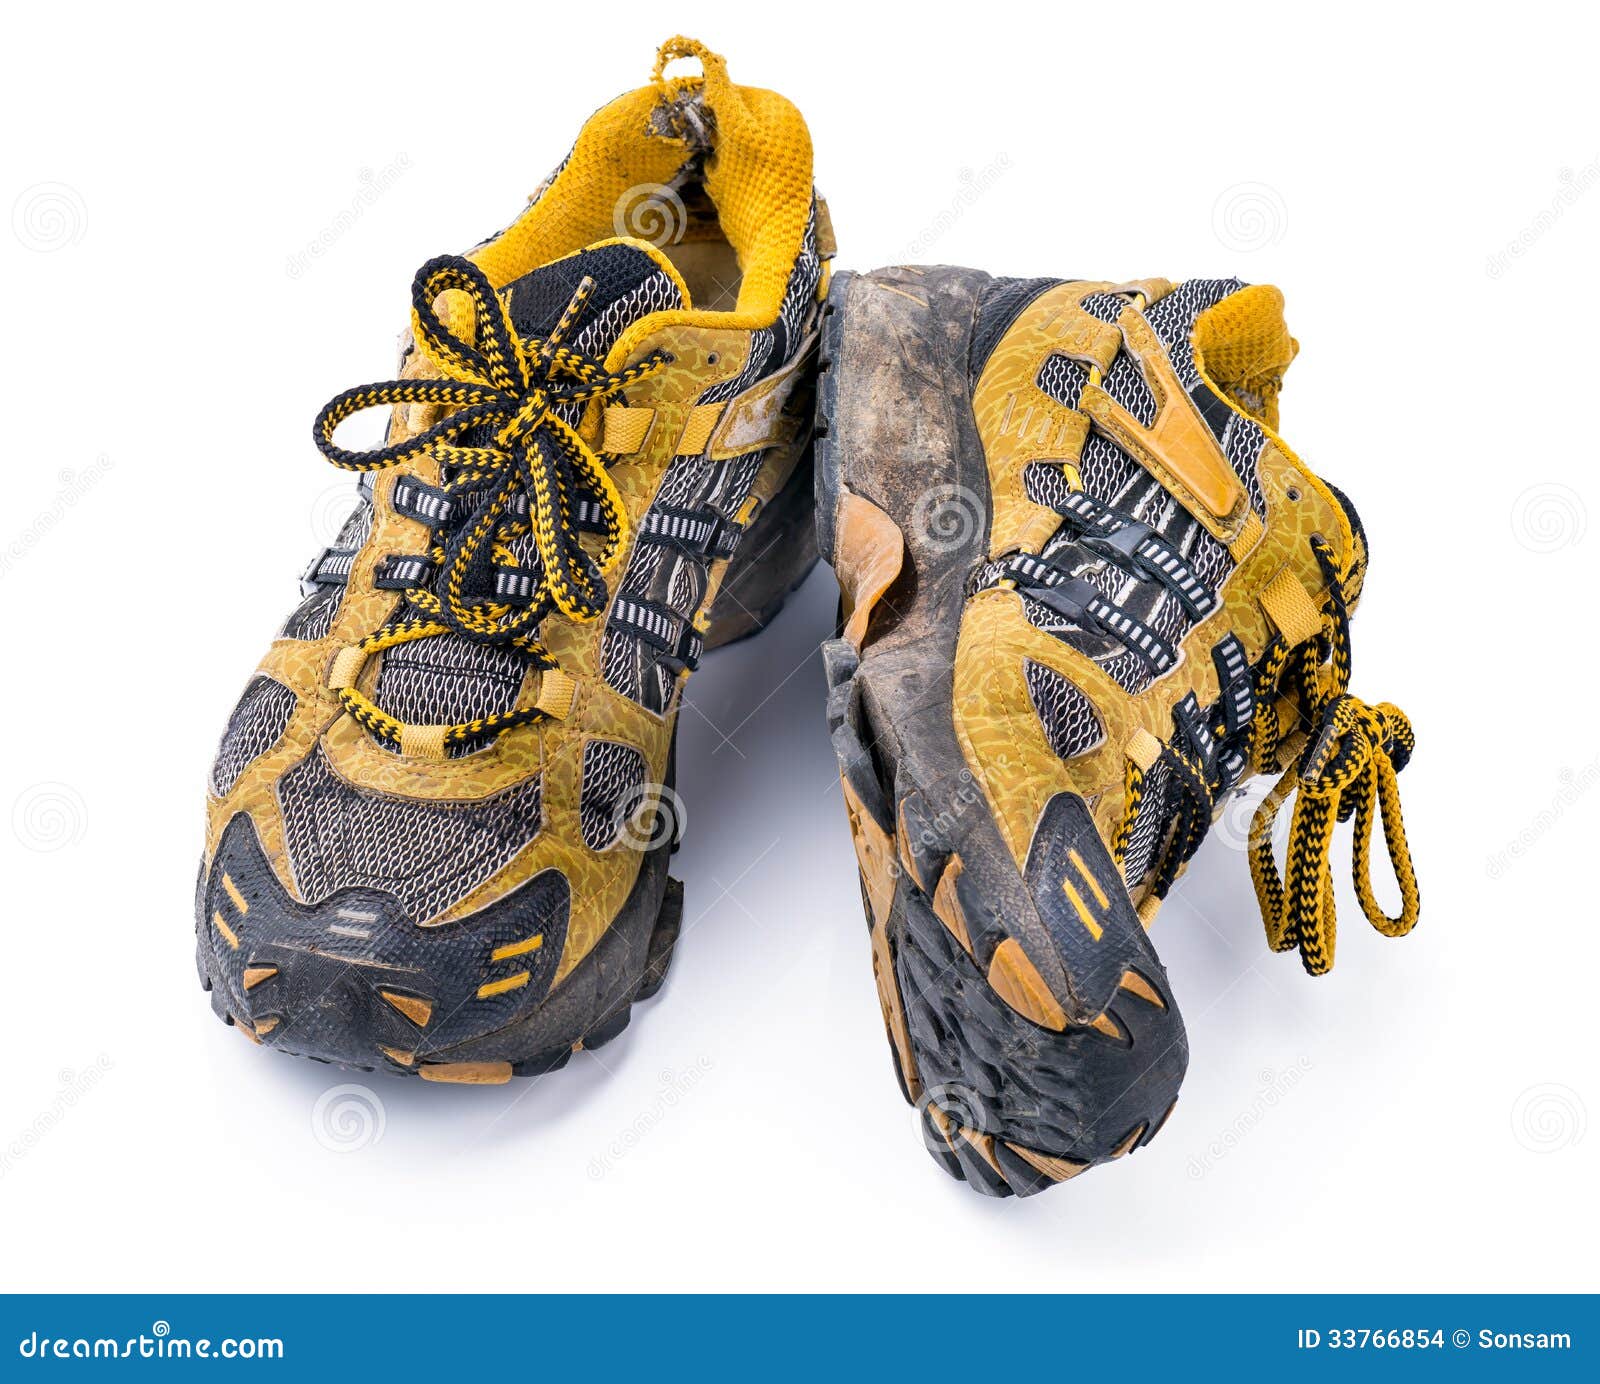 Good old Running Shoes stock photo. Image of heavy, shoe - 33766854